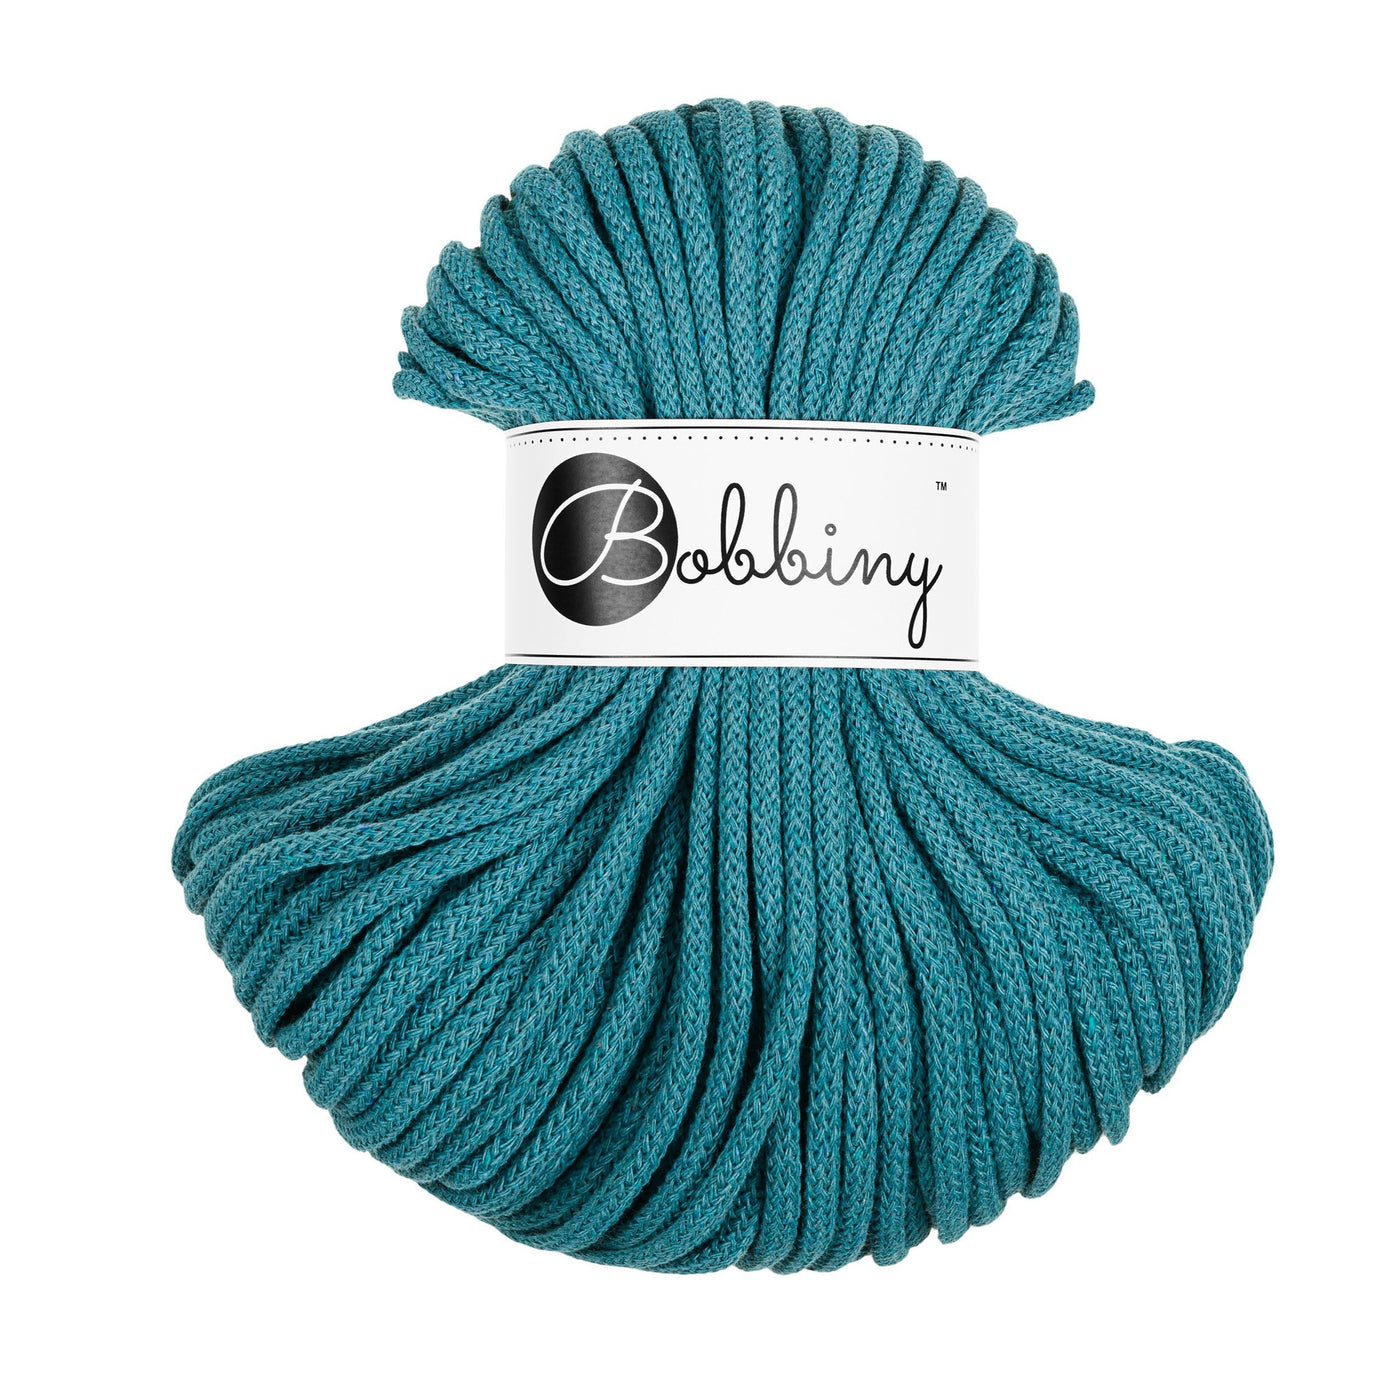 Bobbiny braided cord 5mm 50m in teal shade